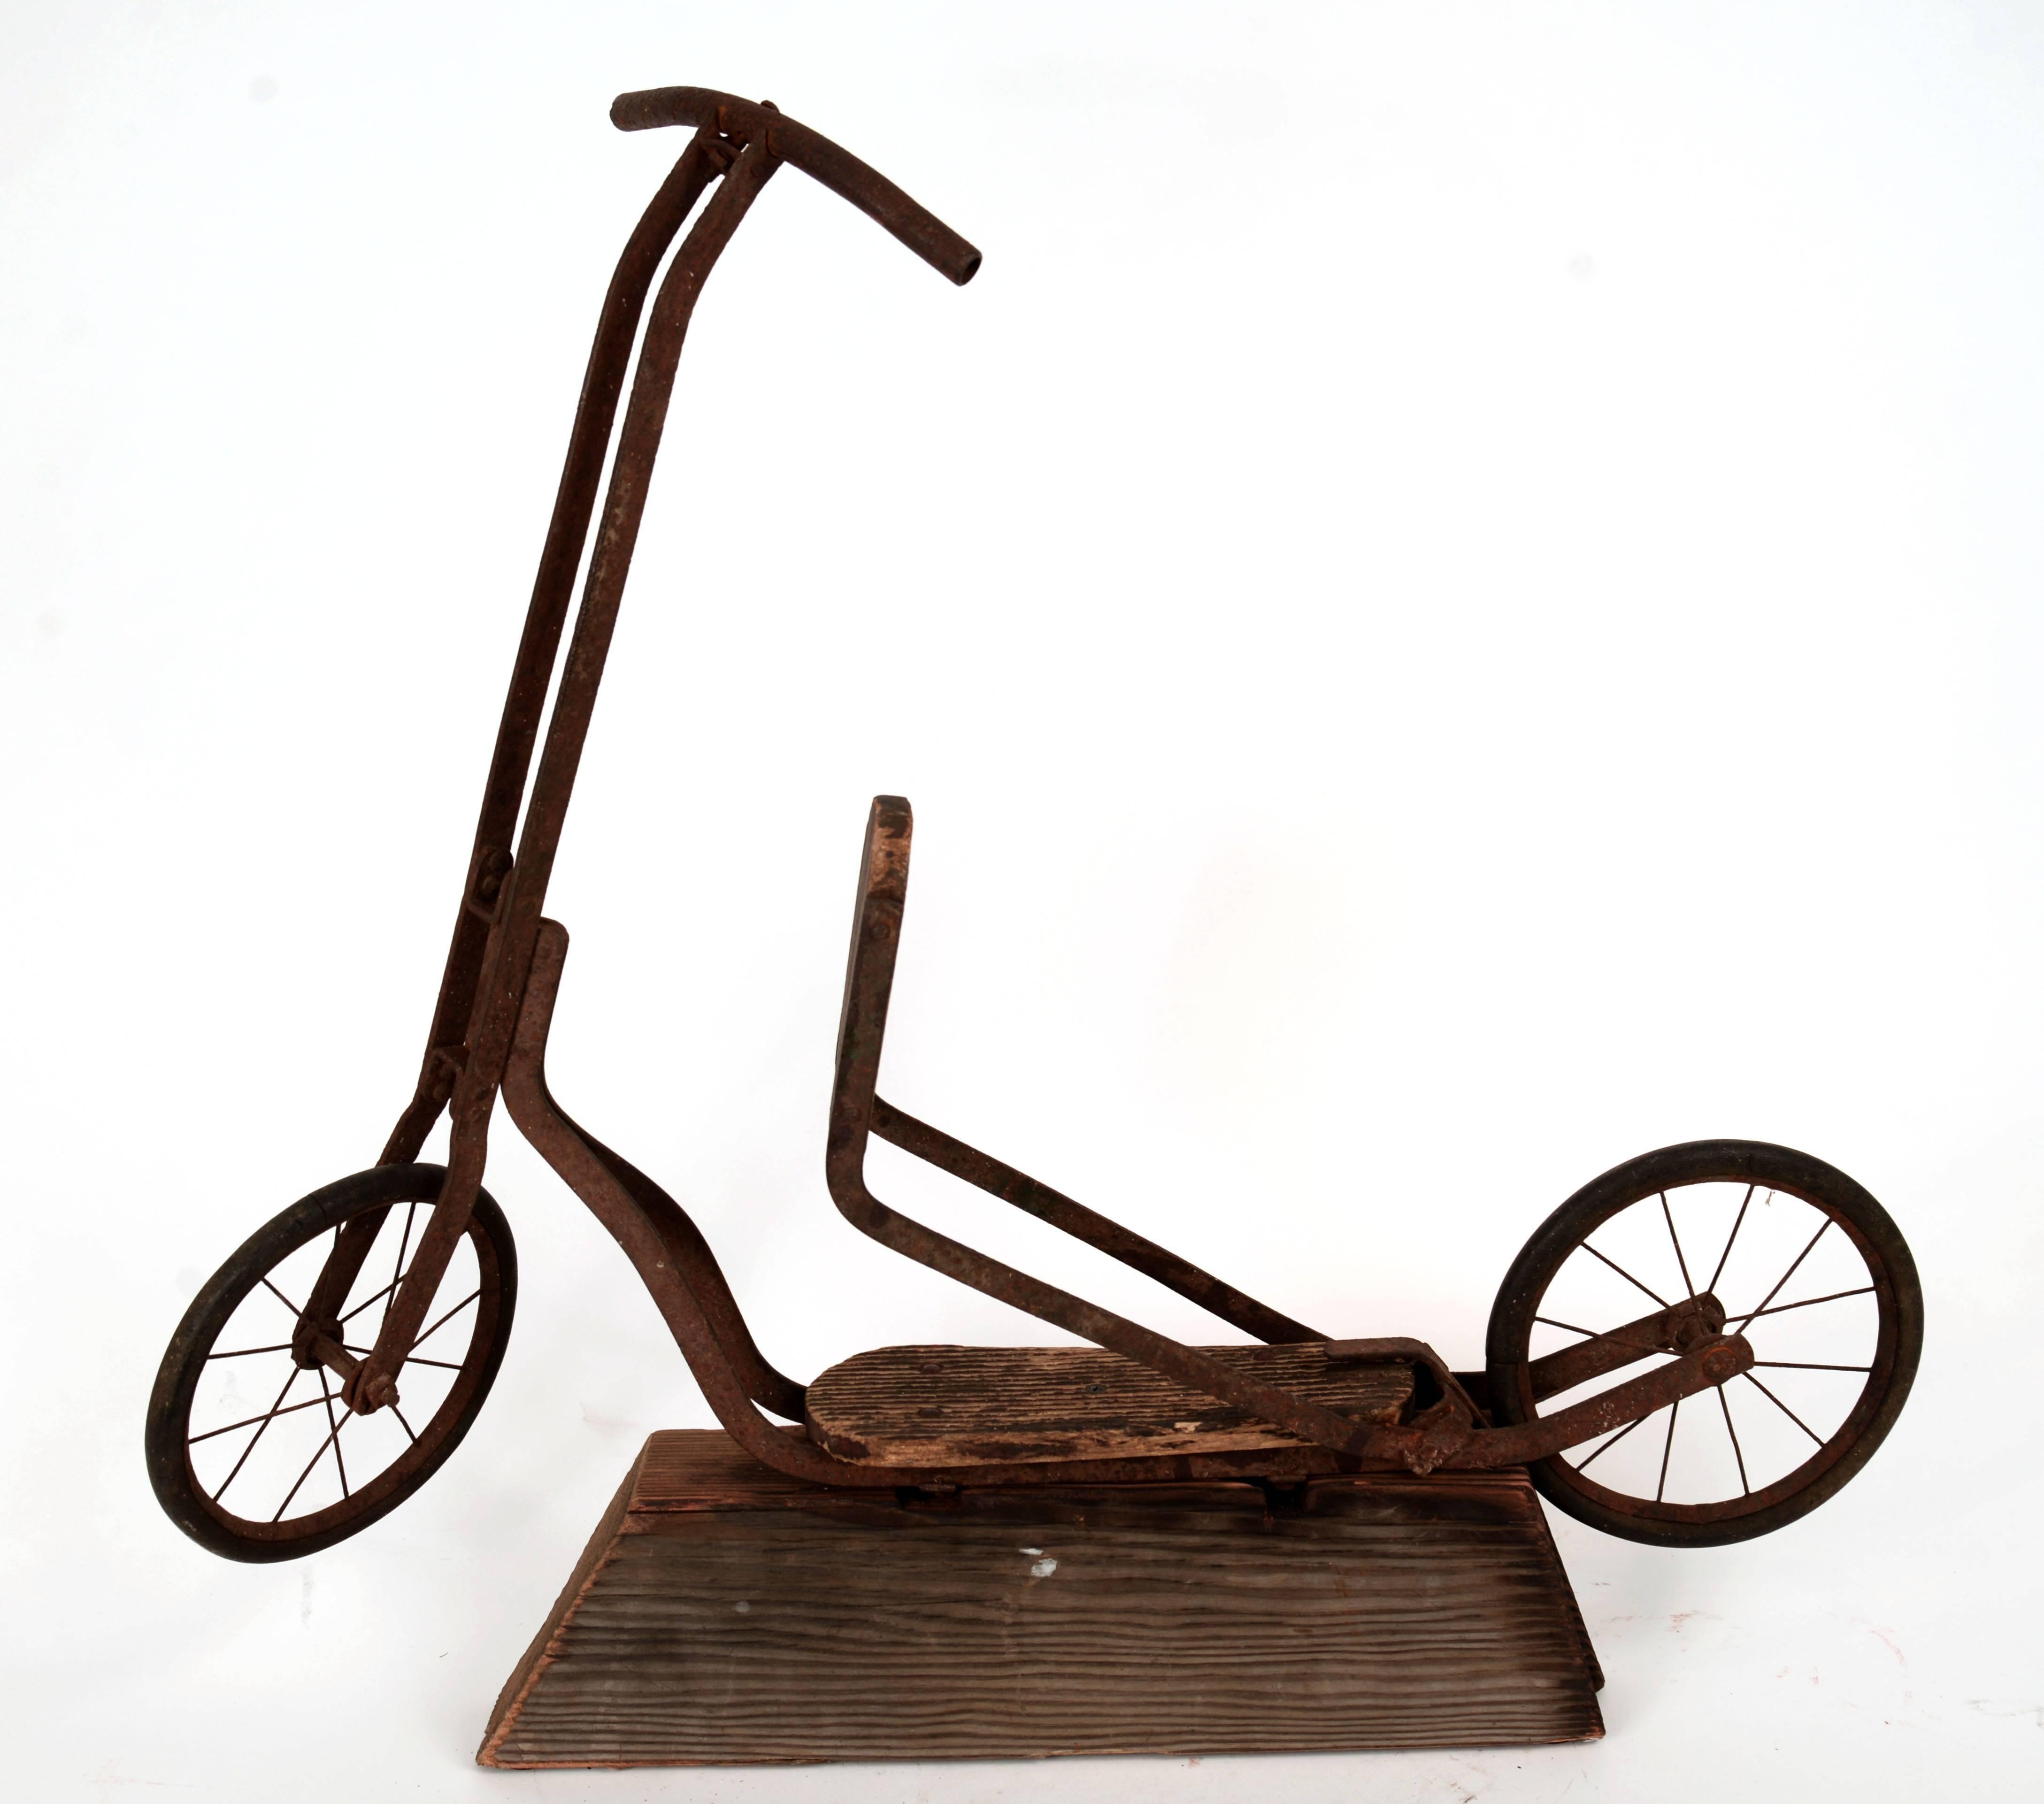 Unique flip seat turn-of-the-century scooter on a wooden stand. There is a great deal of decay and surface rust to this decorative object but it is still fully intact and super cool.